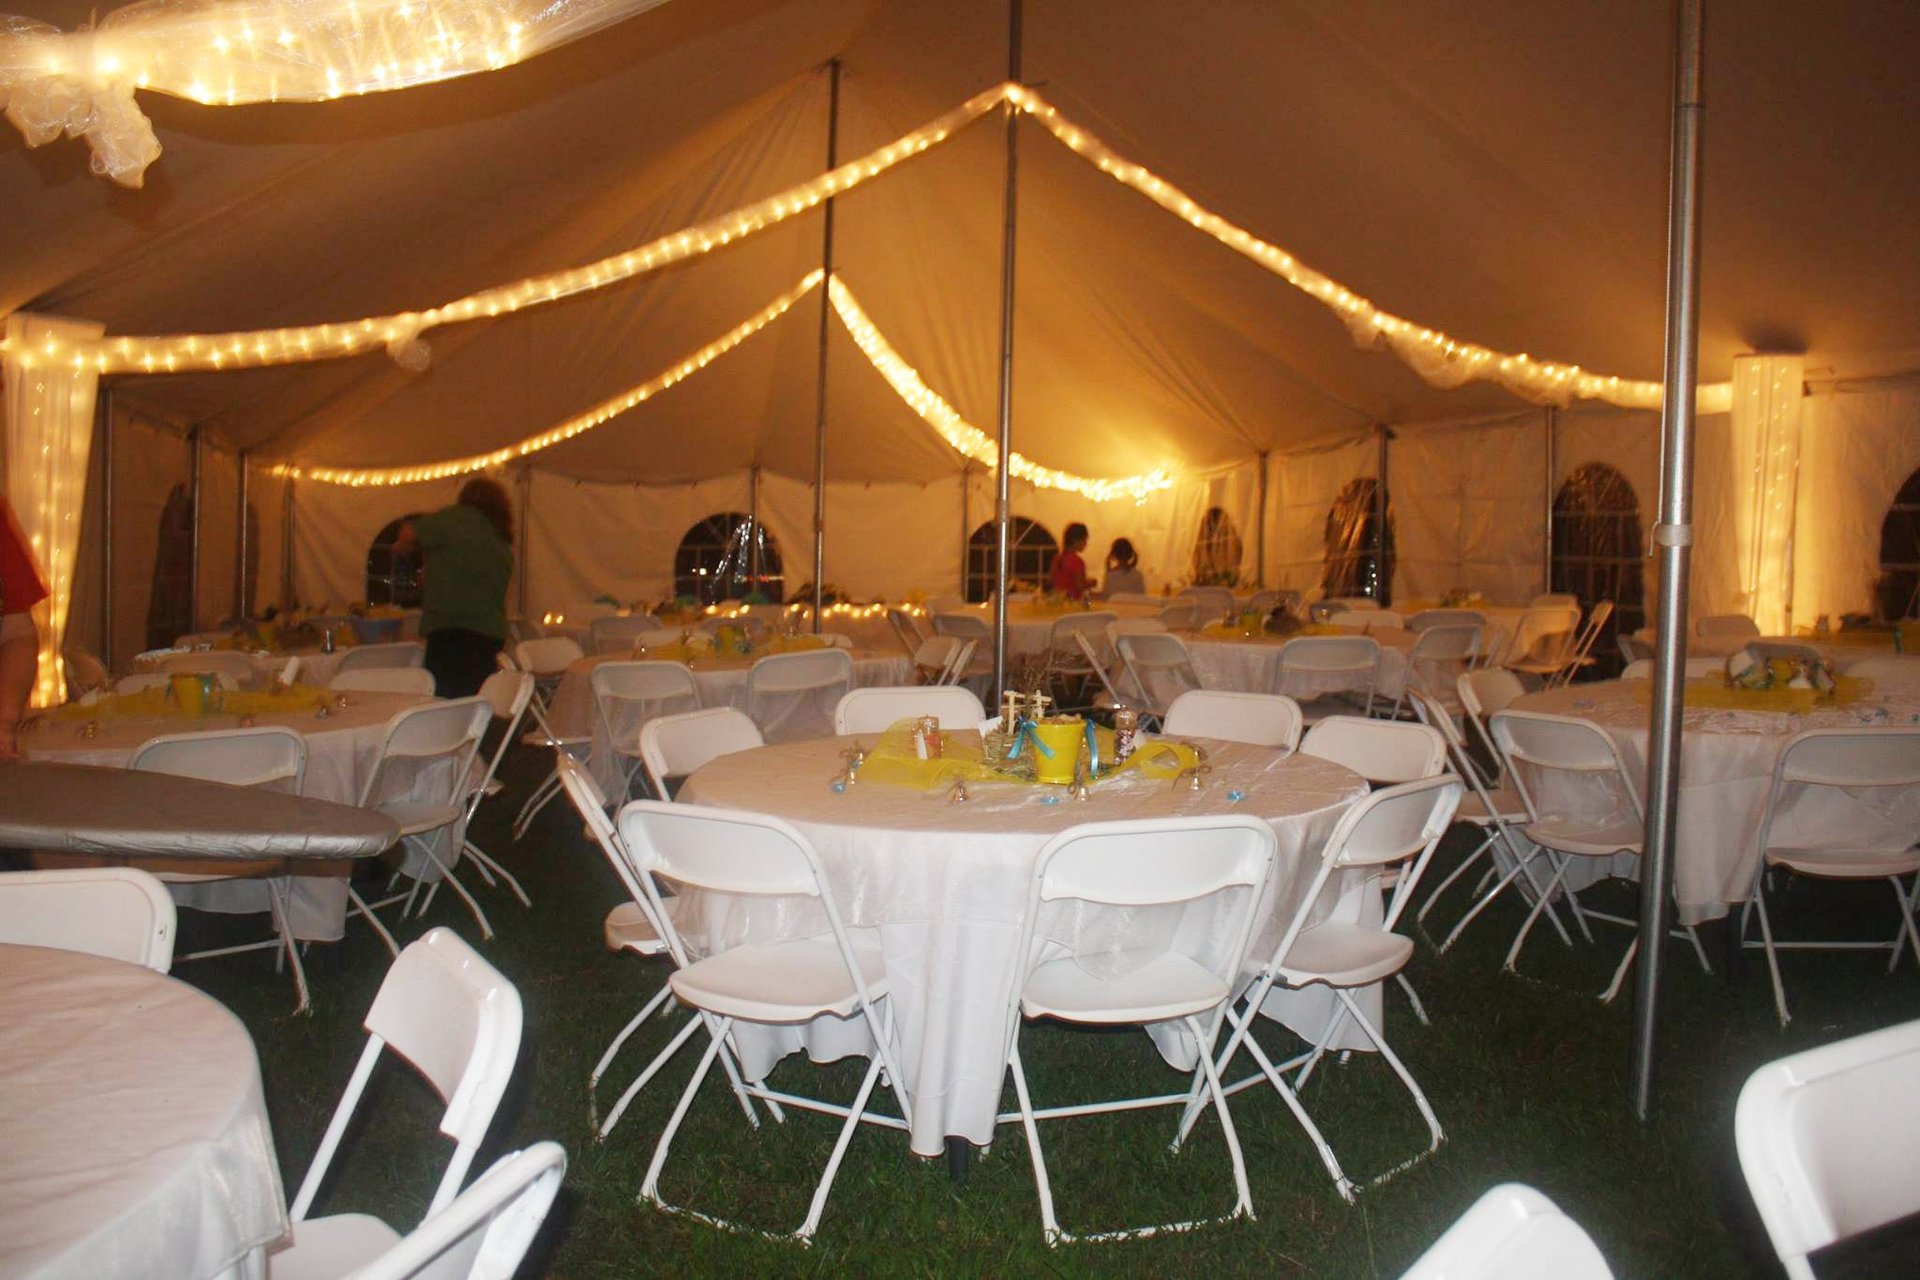 Party+tent+beautiful+decoration-2048x1365.jpg